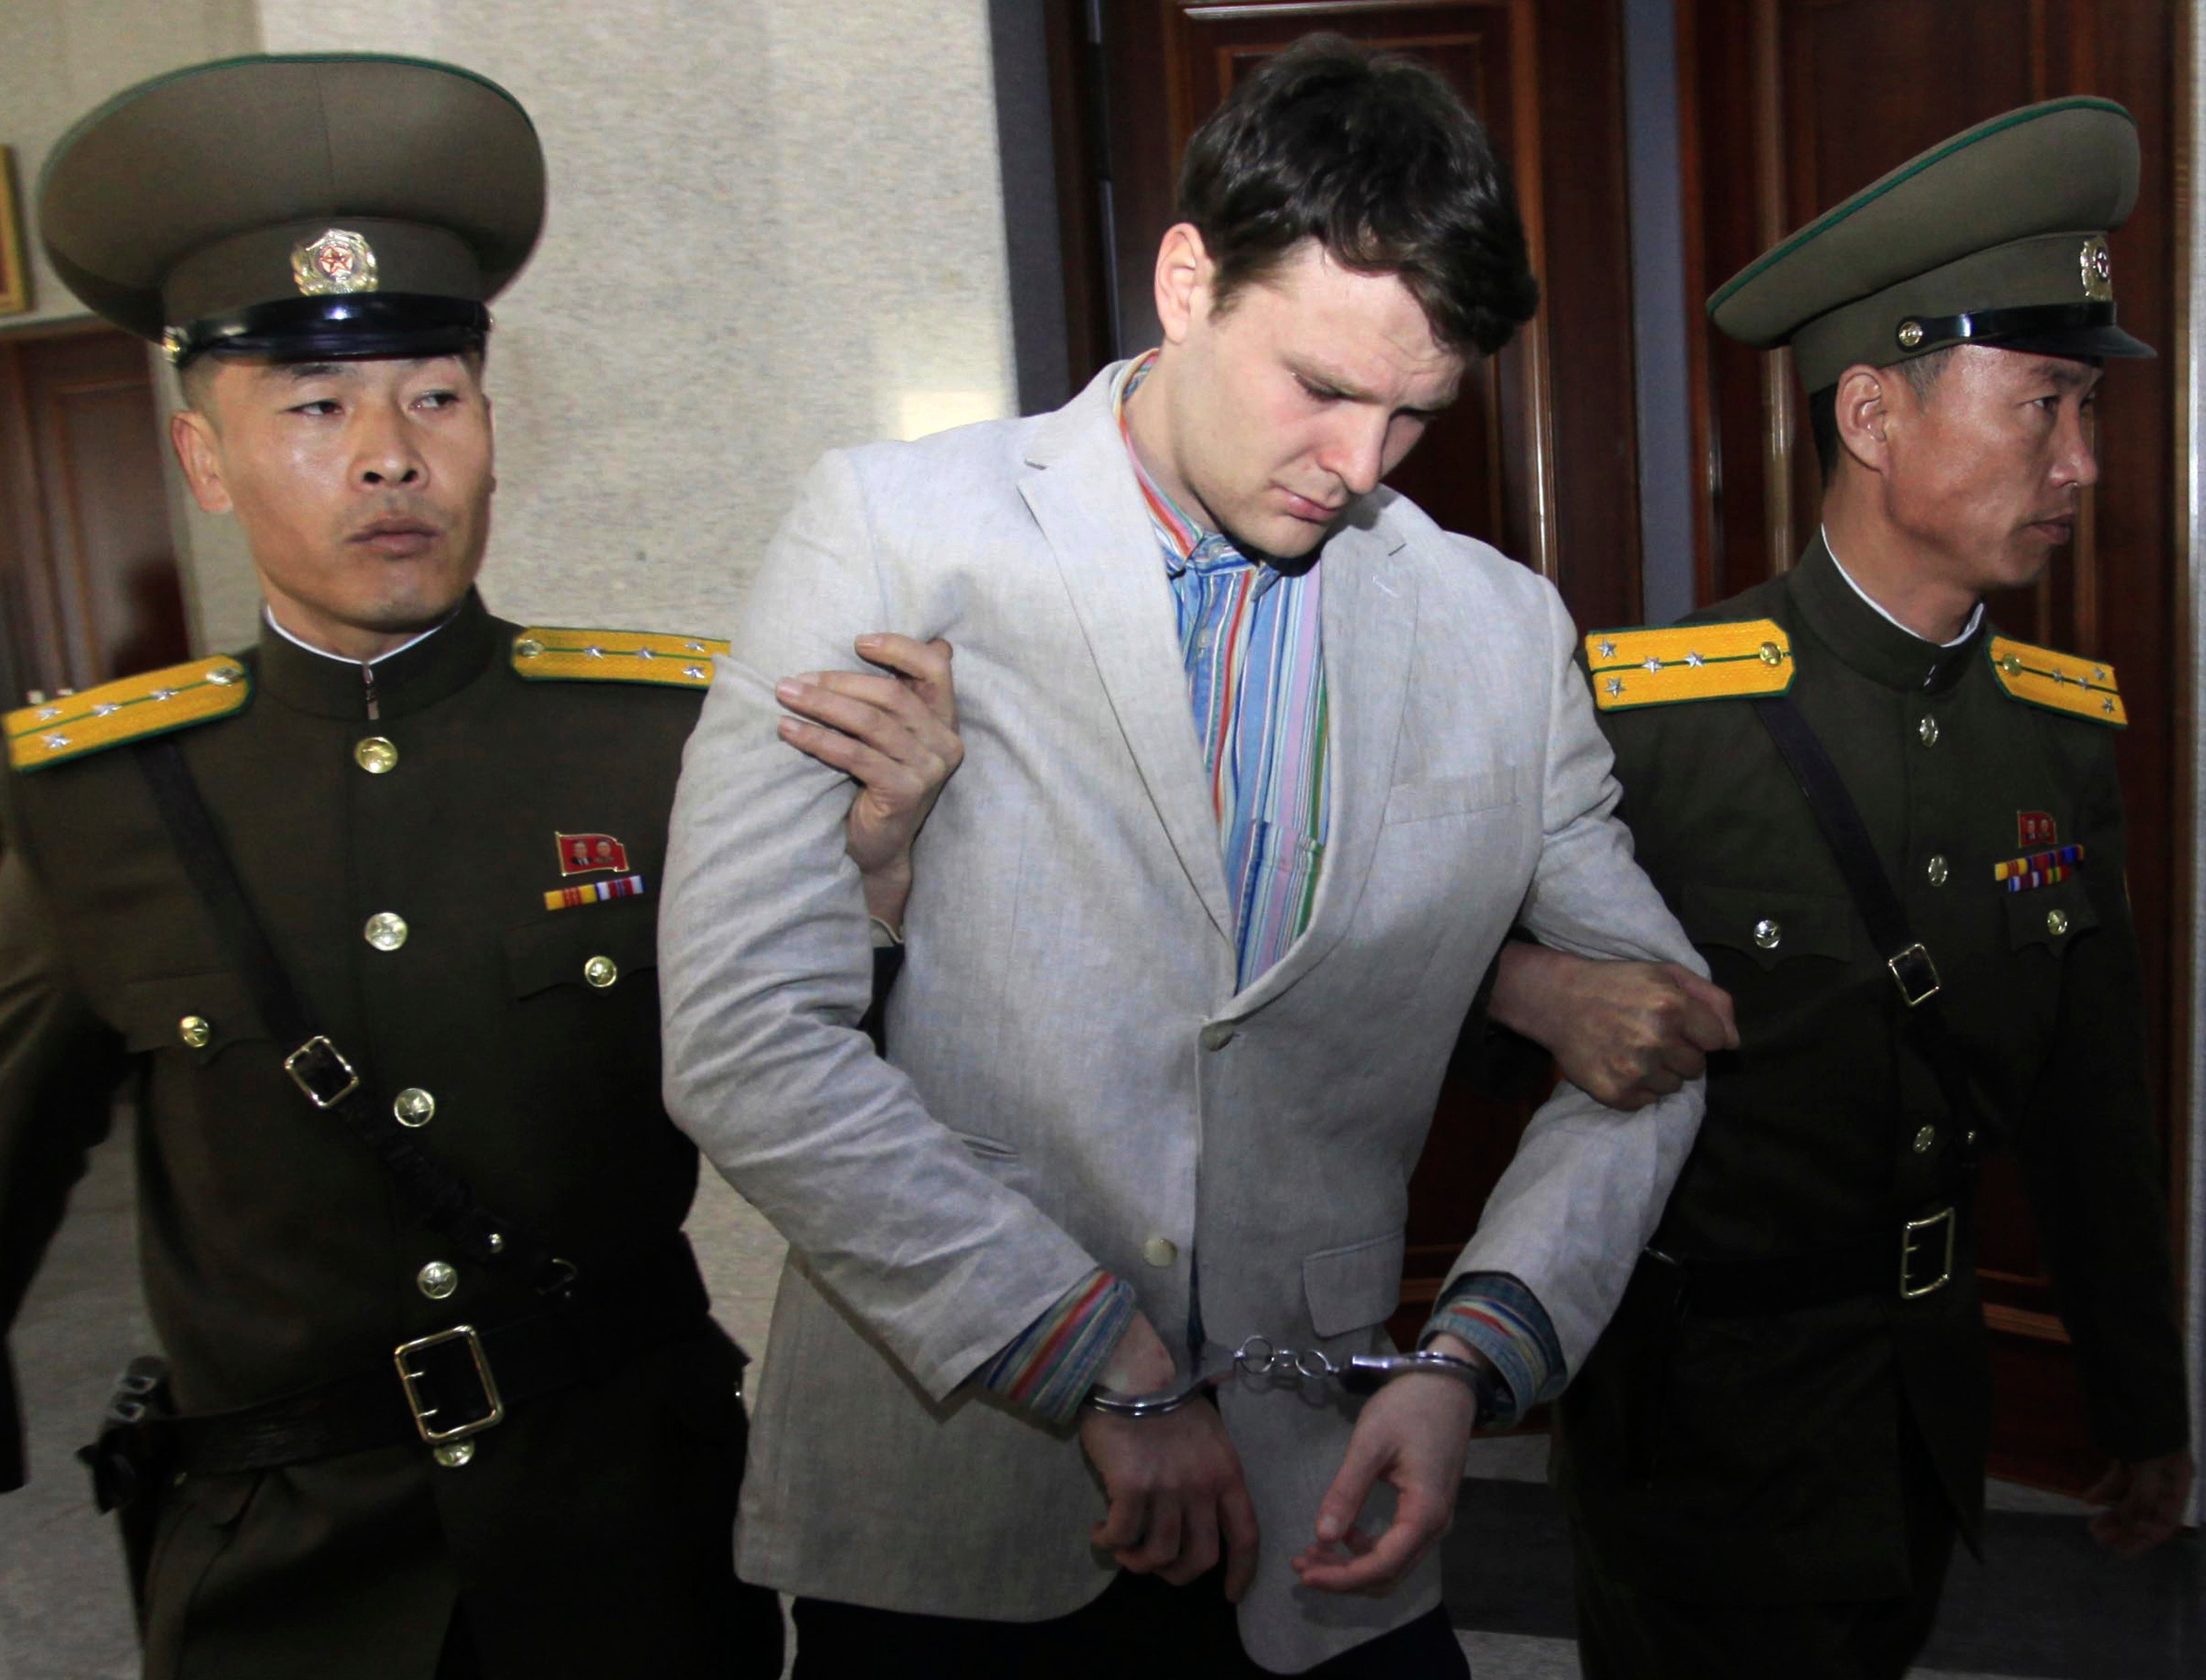 American student Otto Warmbier (centre) escorted at the Supreme Court in Pyongyang, North Korea on 16 March 2016